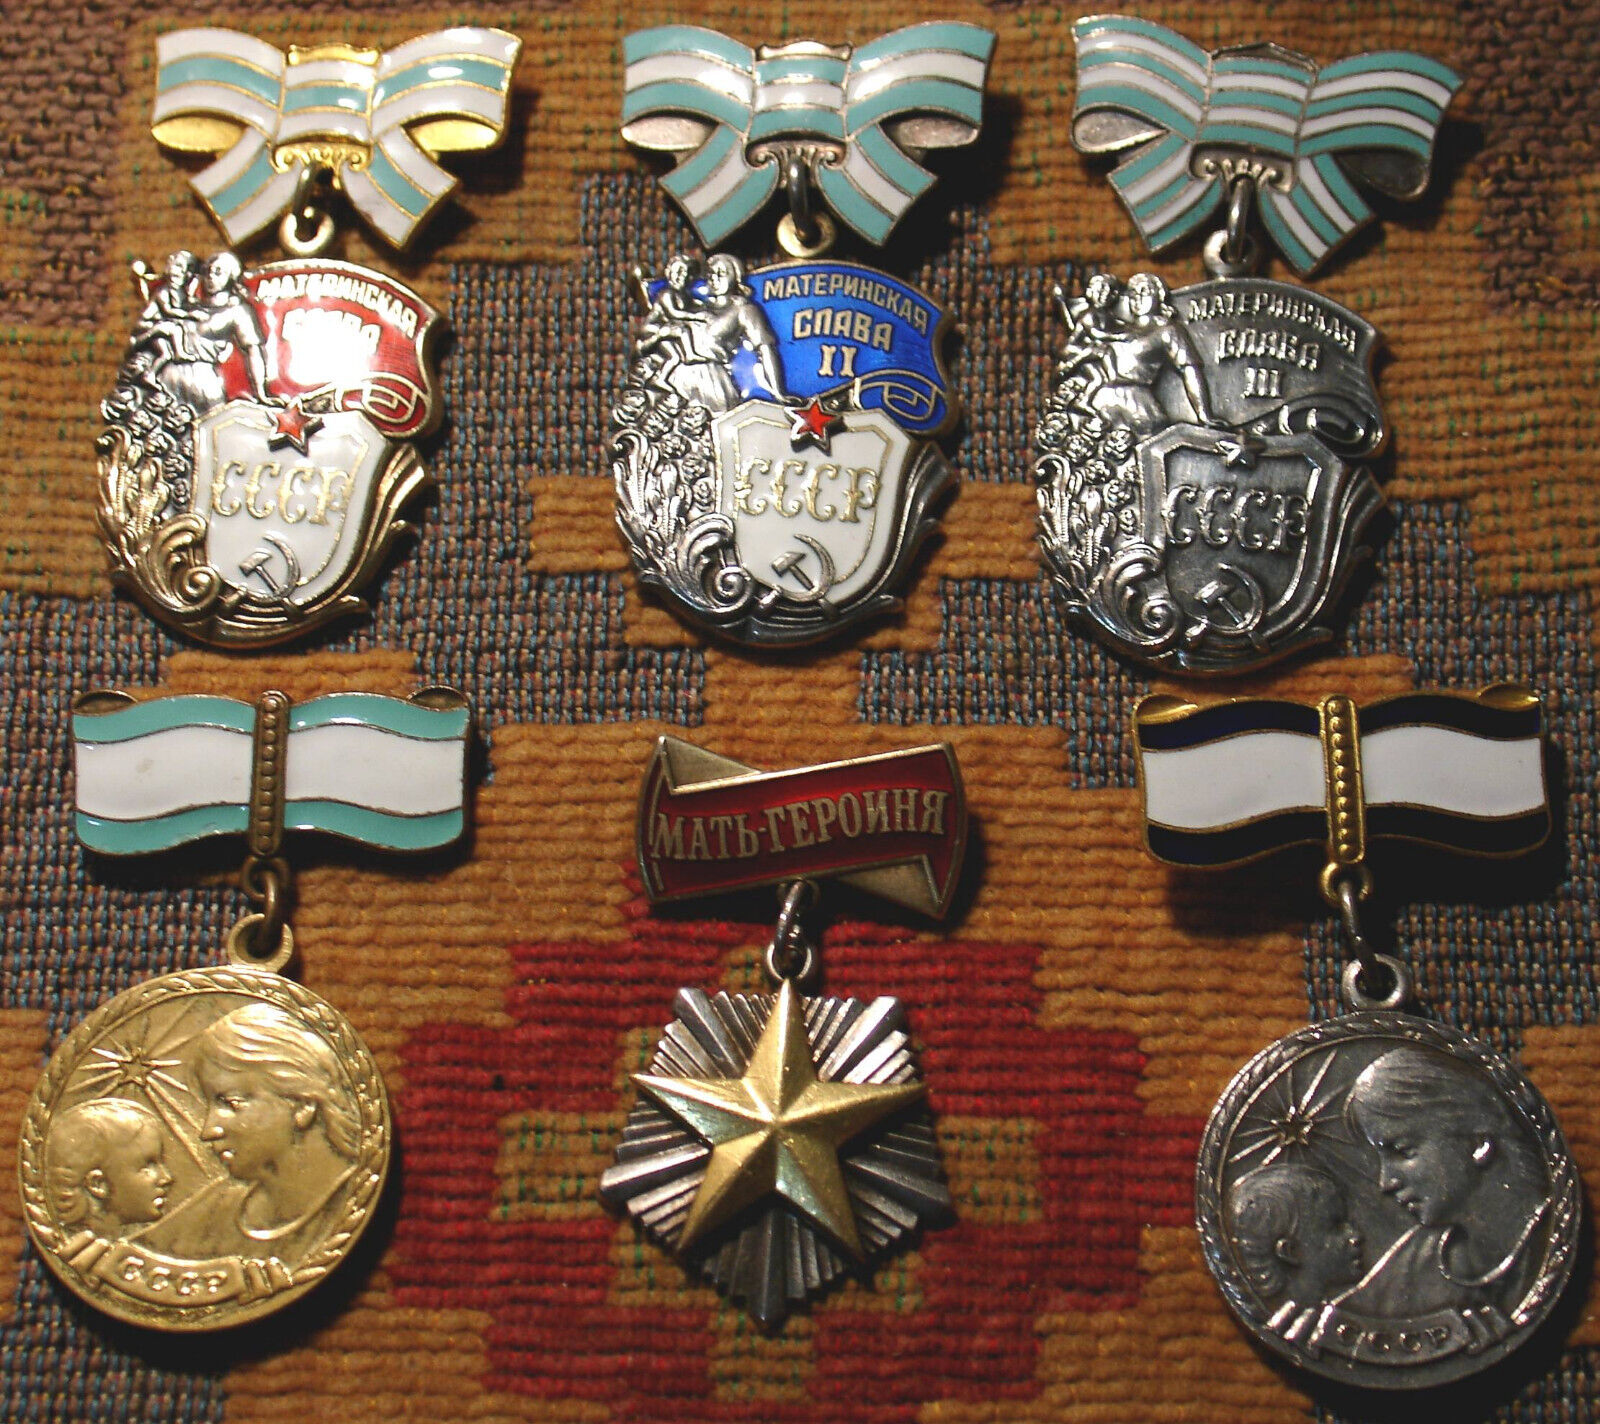 RUSSIA SILVER AND GOLD ORDER SET MATERNITY GLORY 6 MEDAL SOVIET USSR AWARD  L@@K